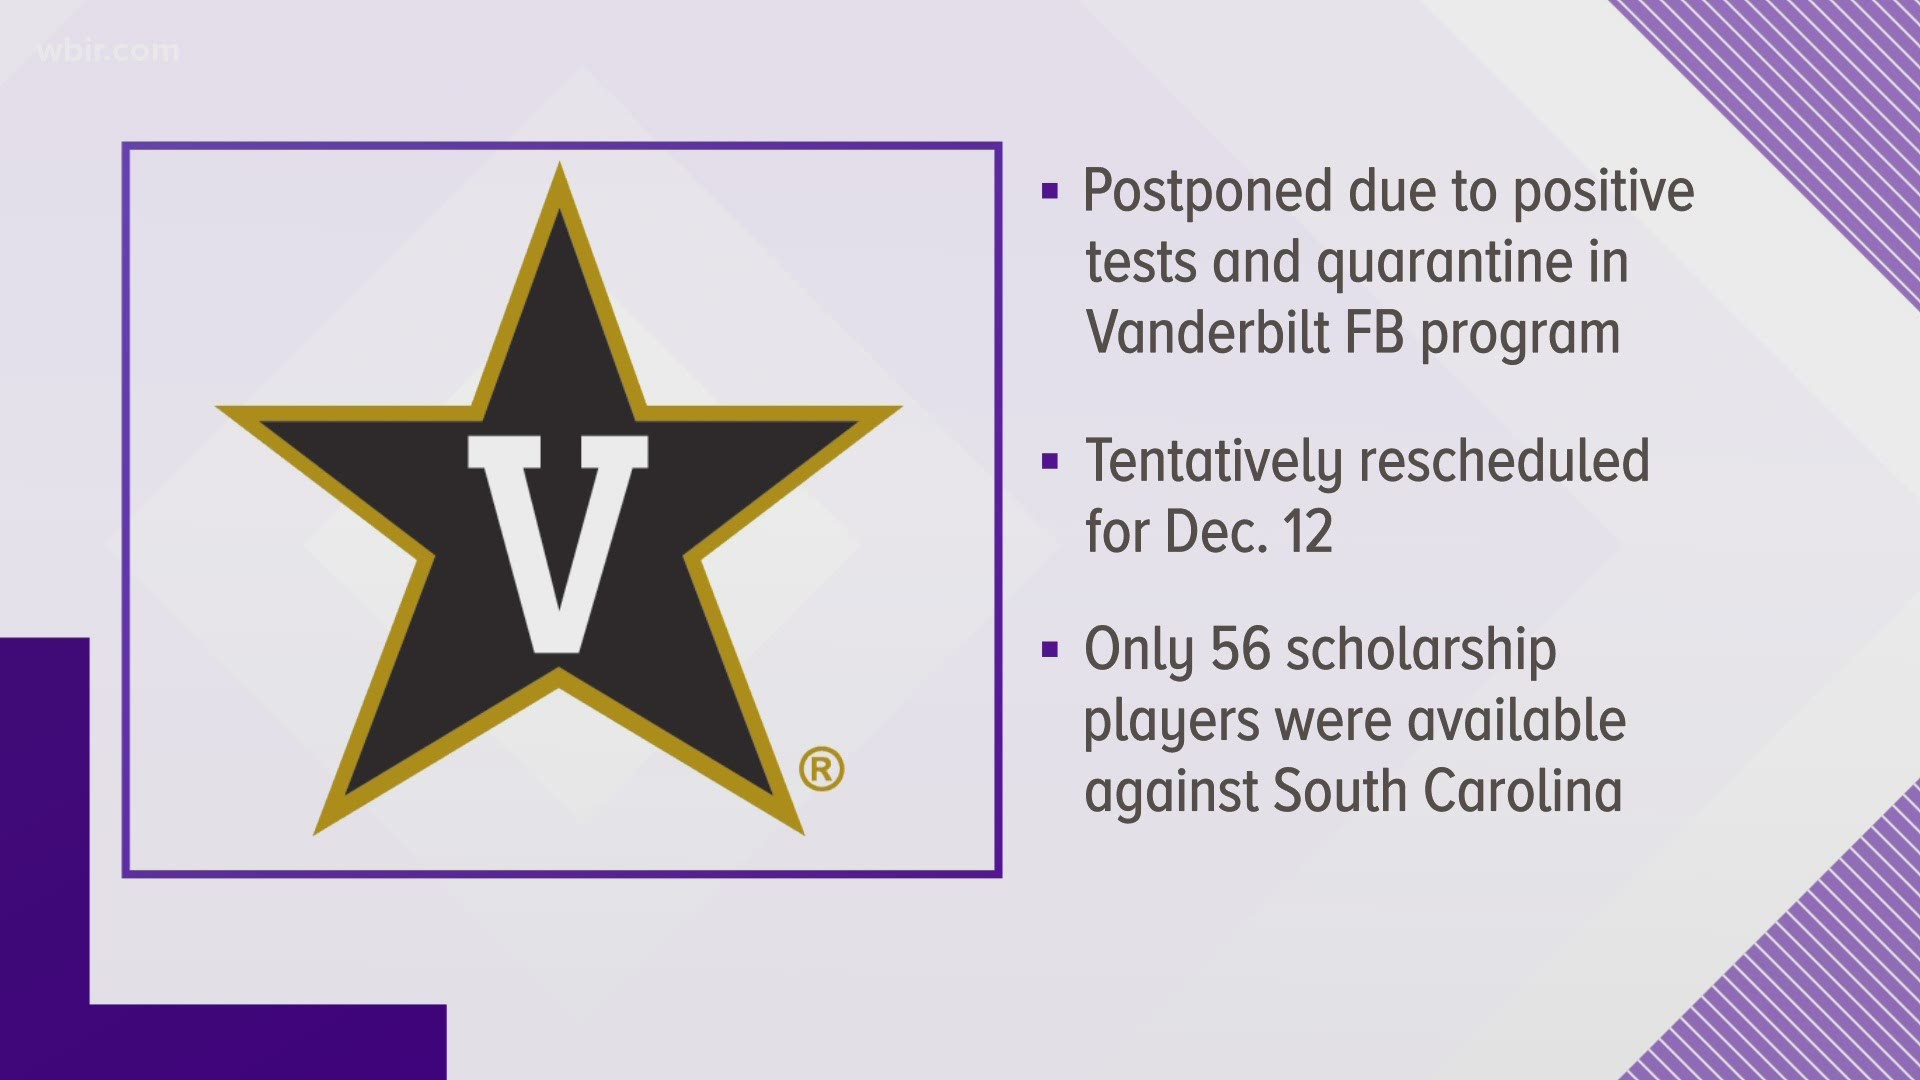 The game has been tentatively rescheduled to December 12.